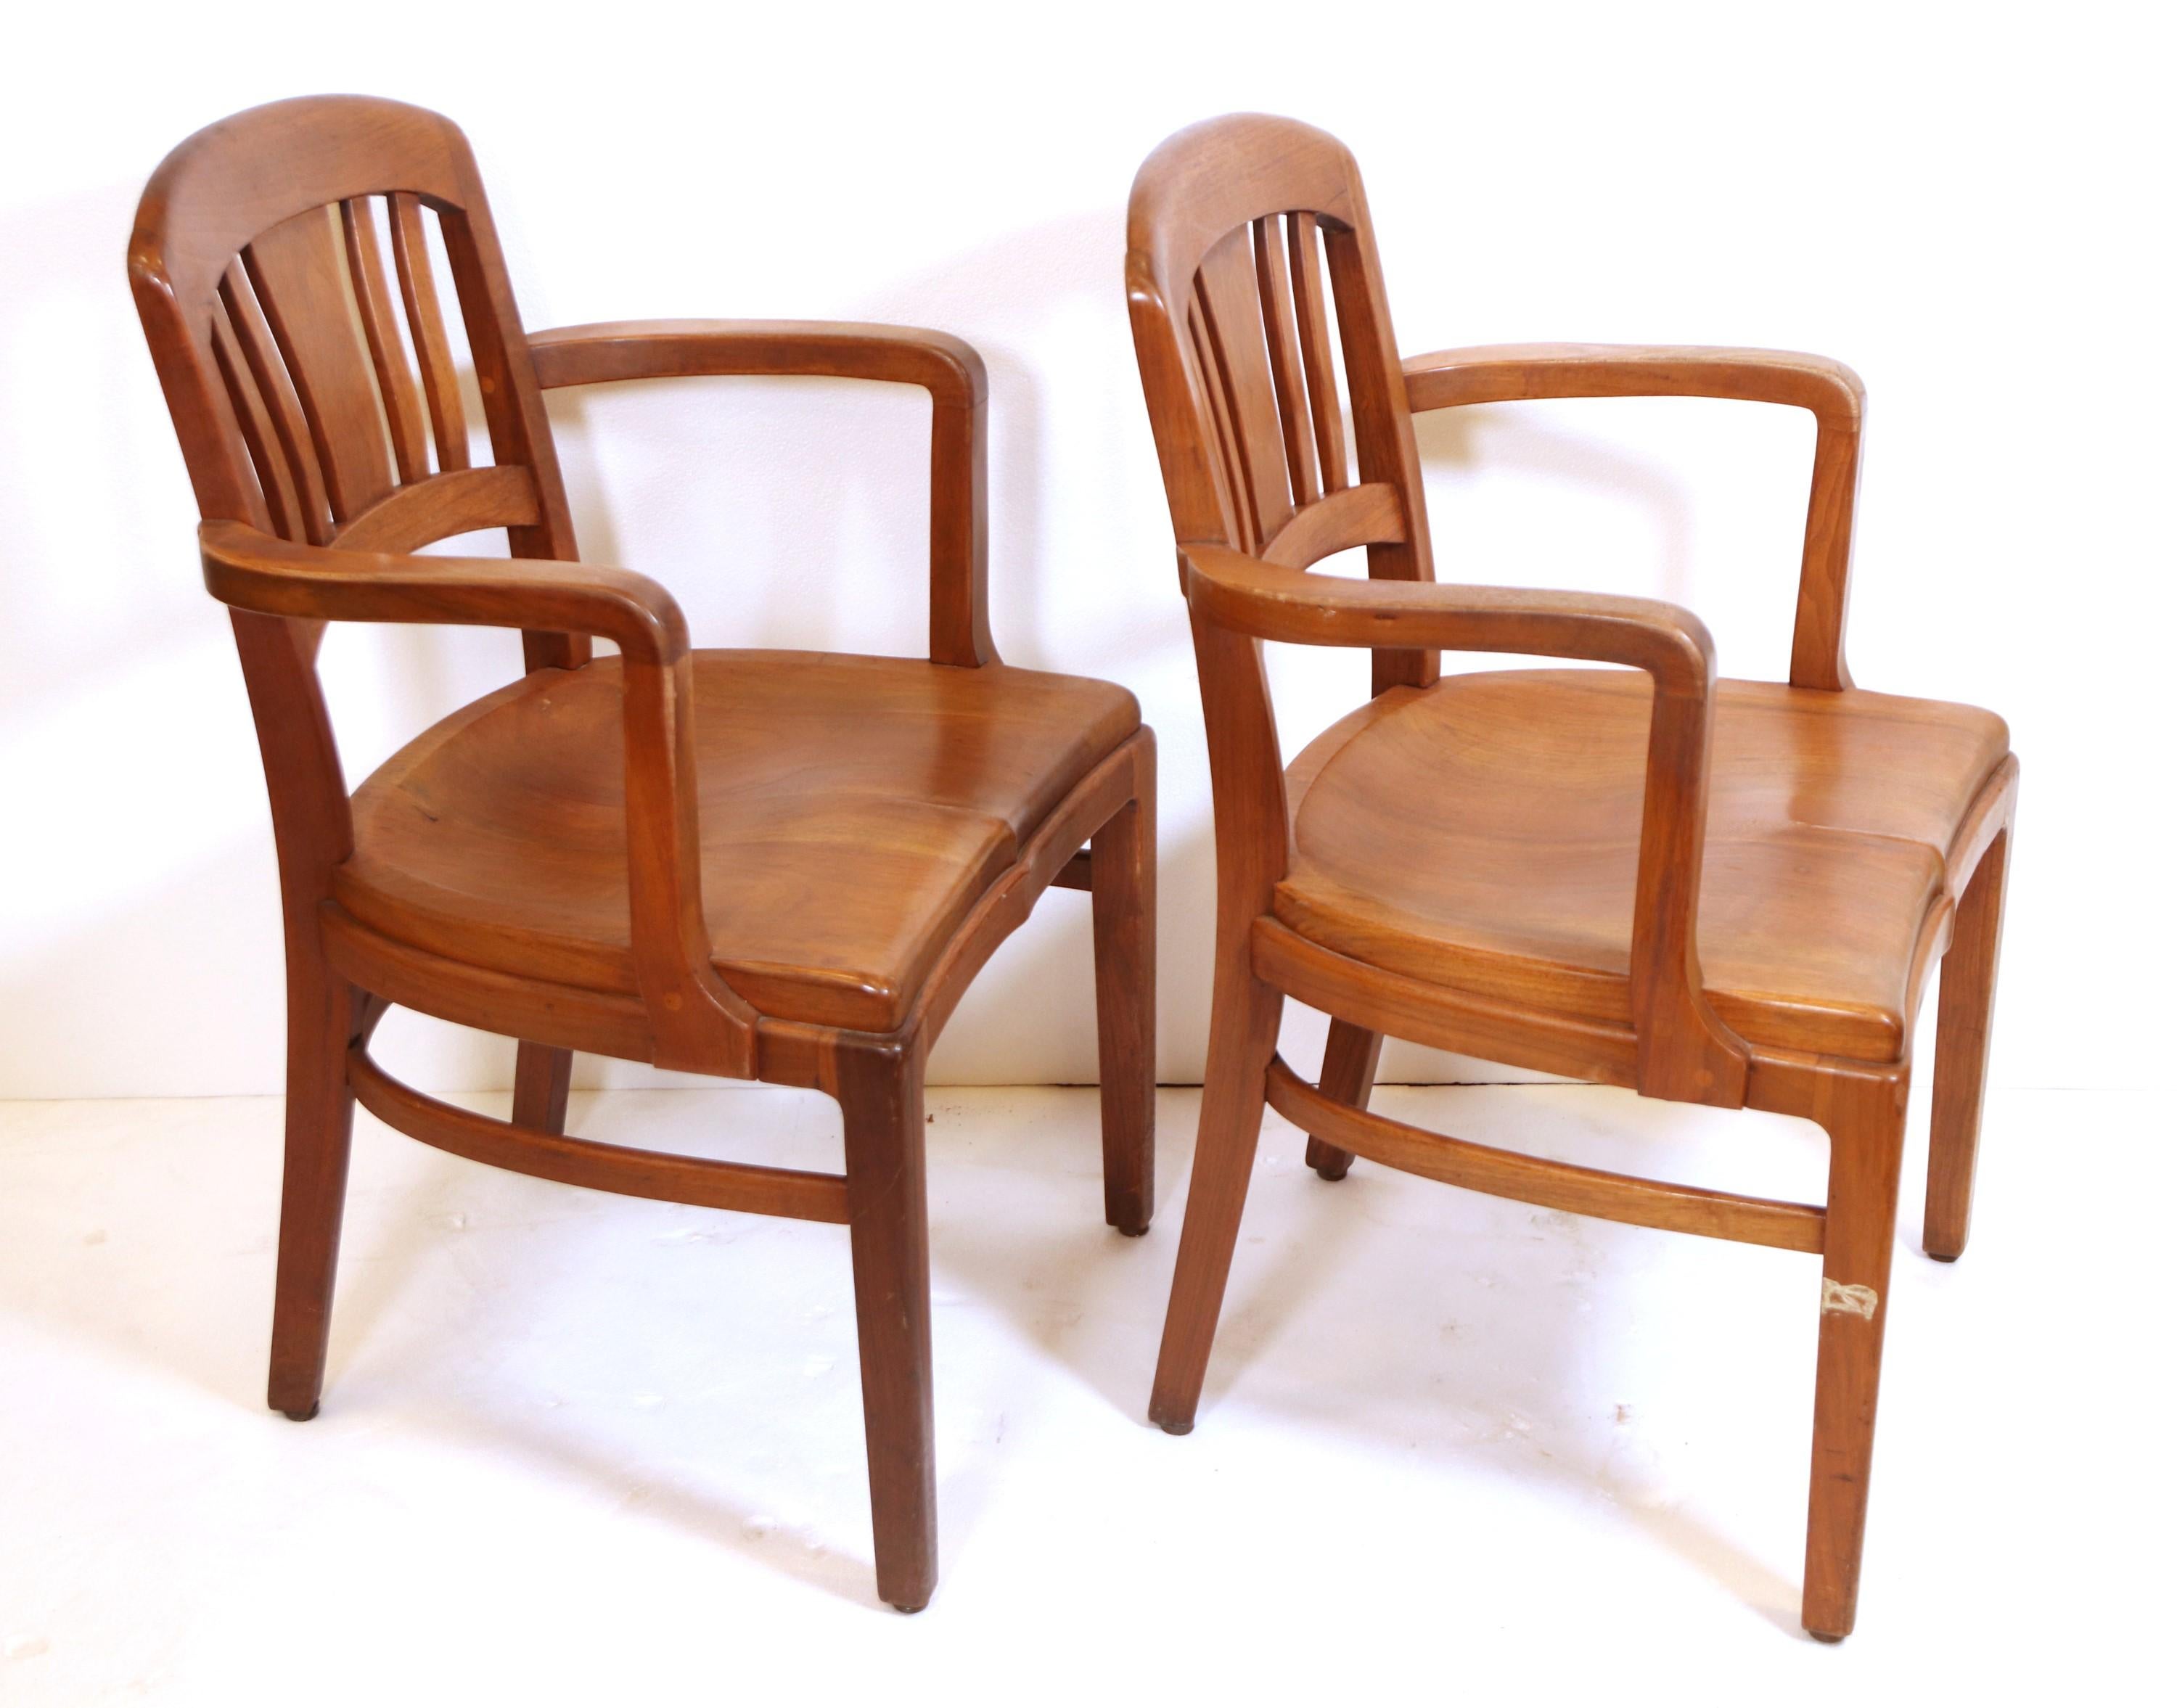 Mid-Century Modern walnut office Banker's style chair made by Gunlocke.  They are solid wood with armrest and have an Art Deco style back. Priced as a pair. Please note, this item is located in one of our NYC locations.